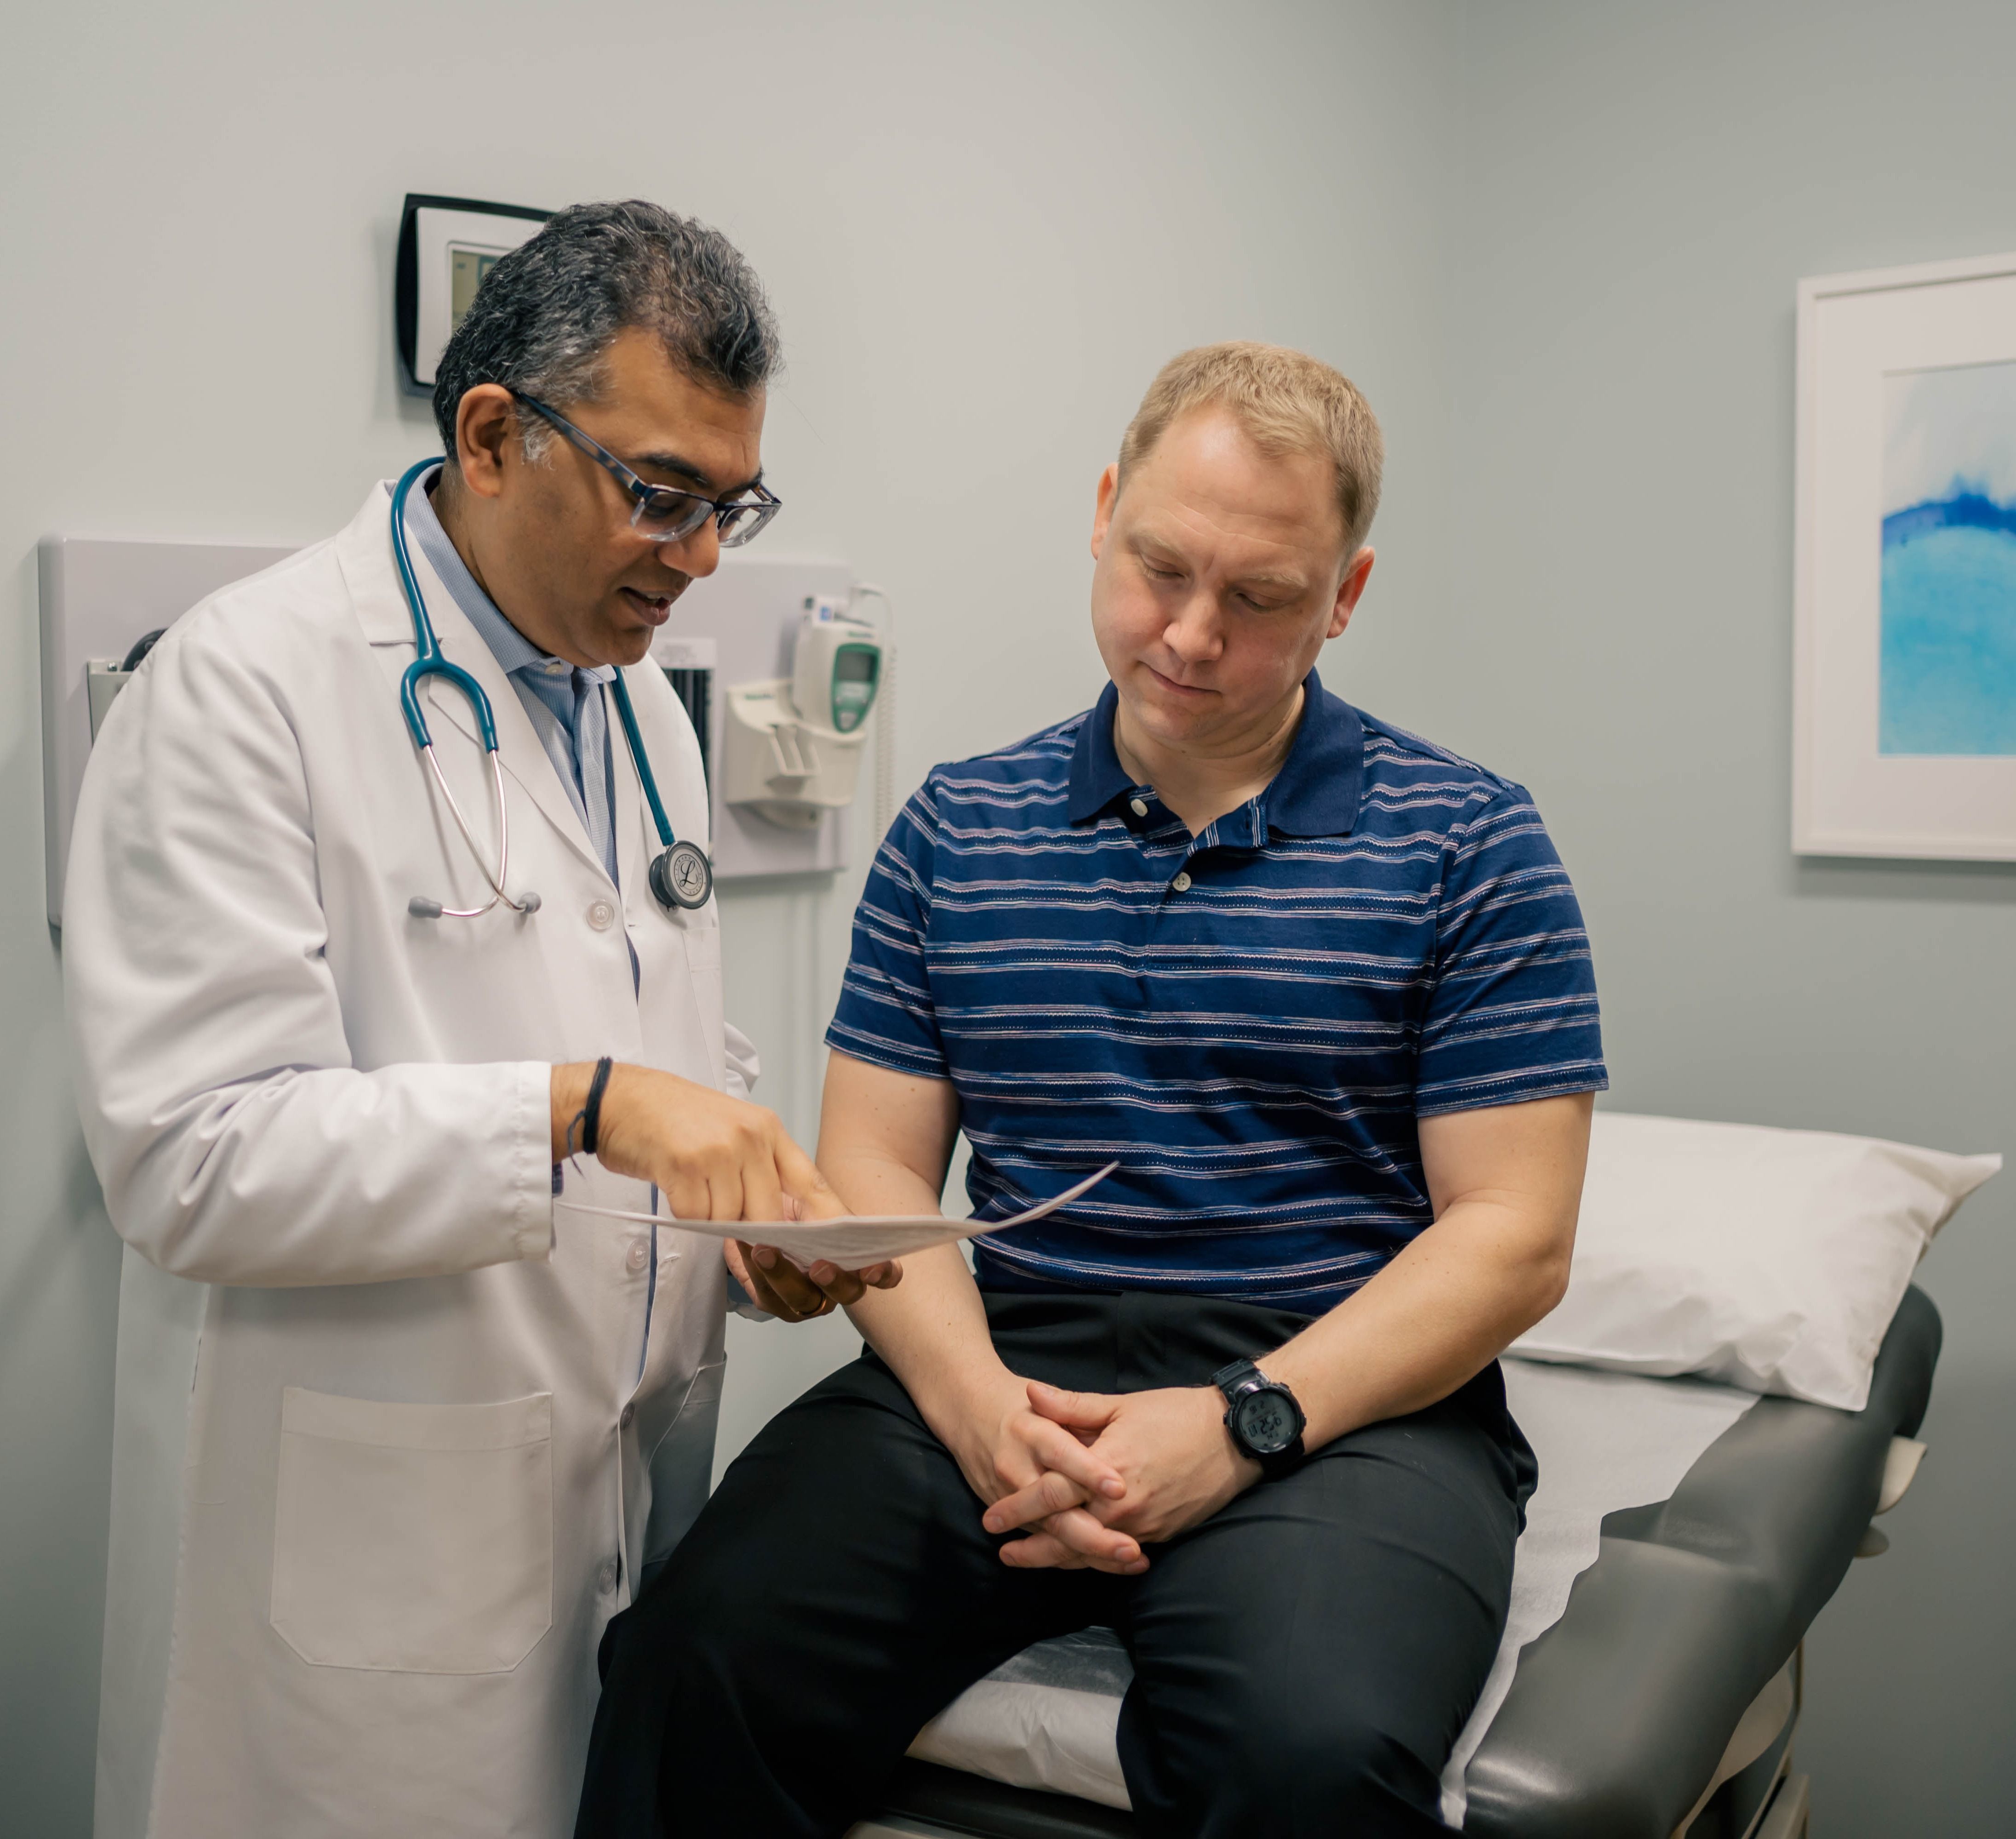 Dr. Rakesh Sarma, a concierge doctor in Sandy Springs, GA, reviews information with a patient during a visit